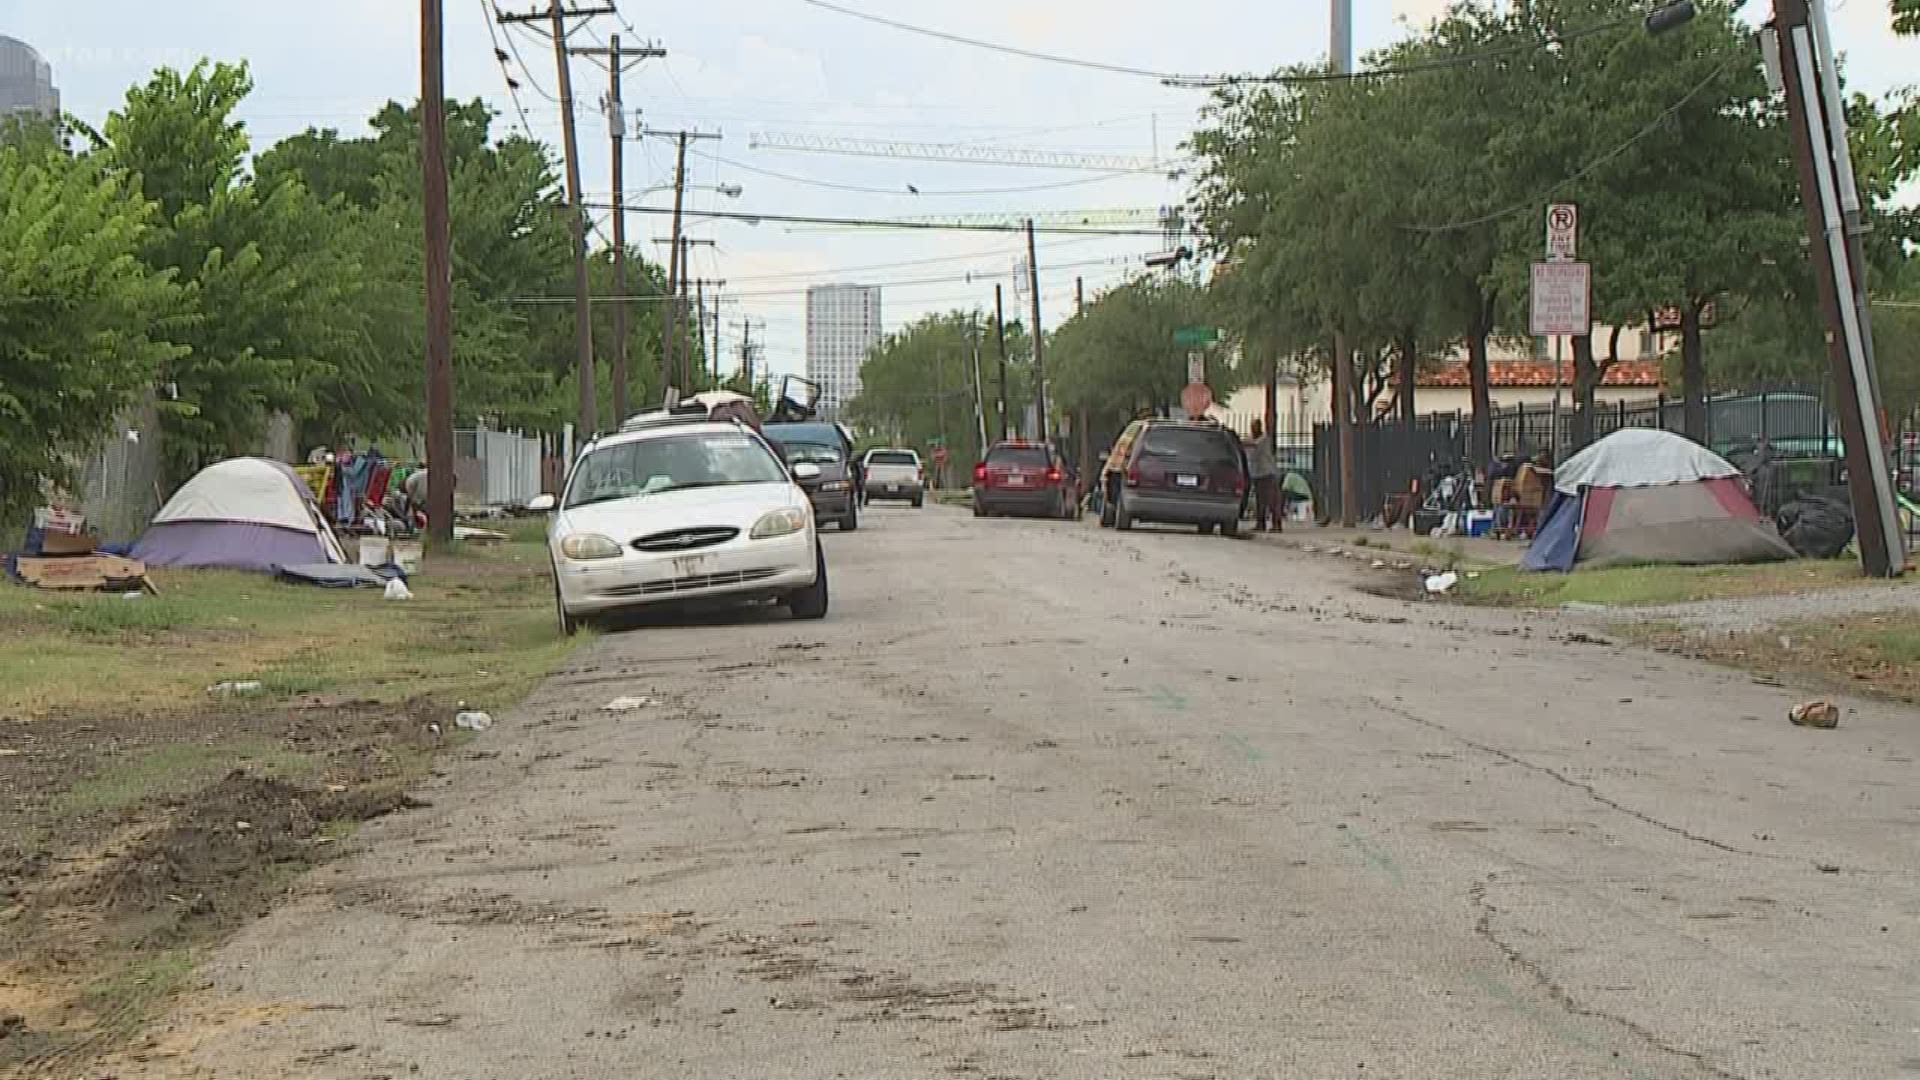 City leaders want feedback on possible solutions to Dallas' homelessness problem.